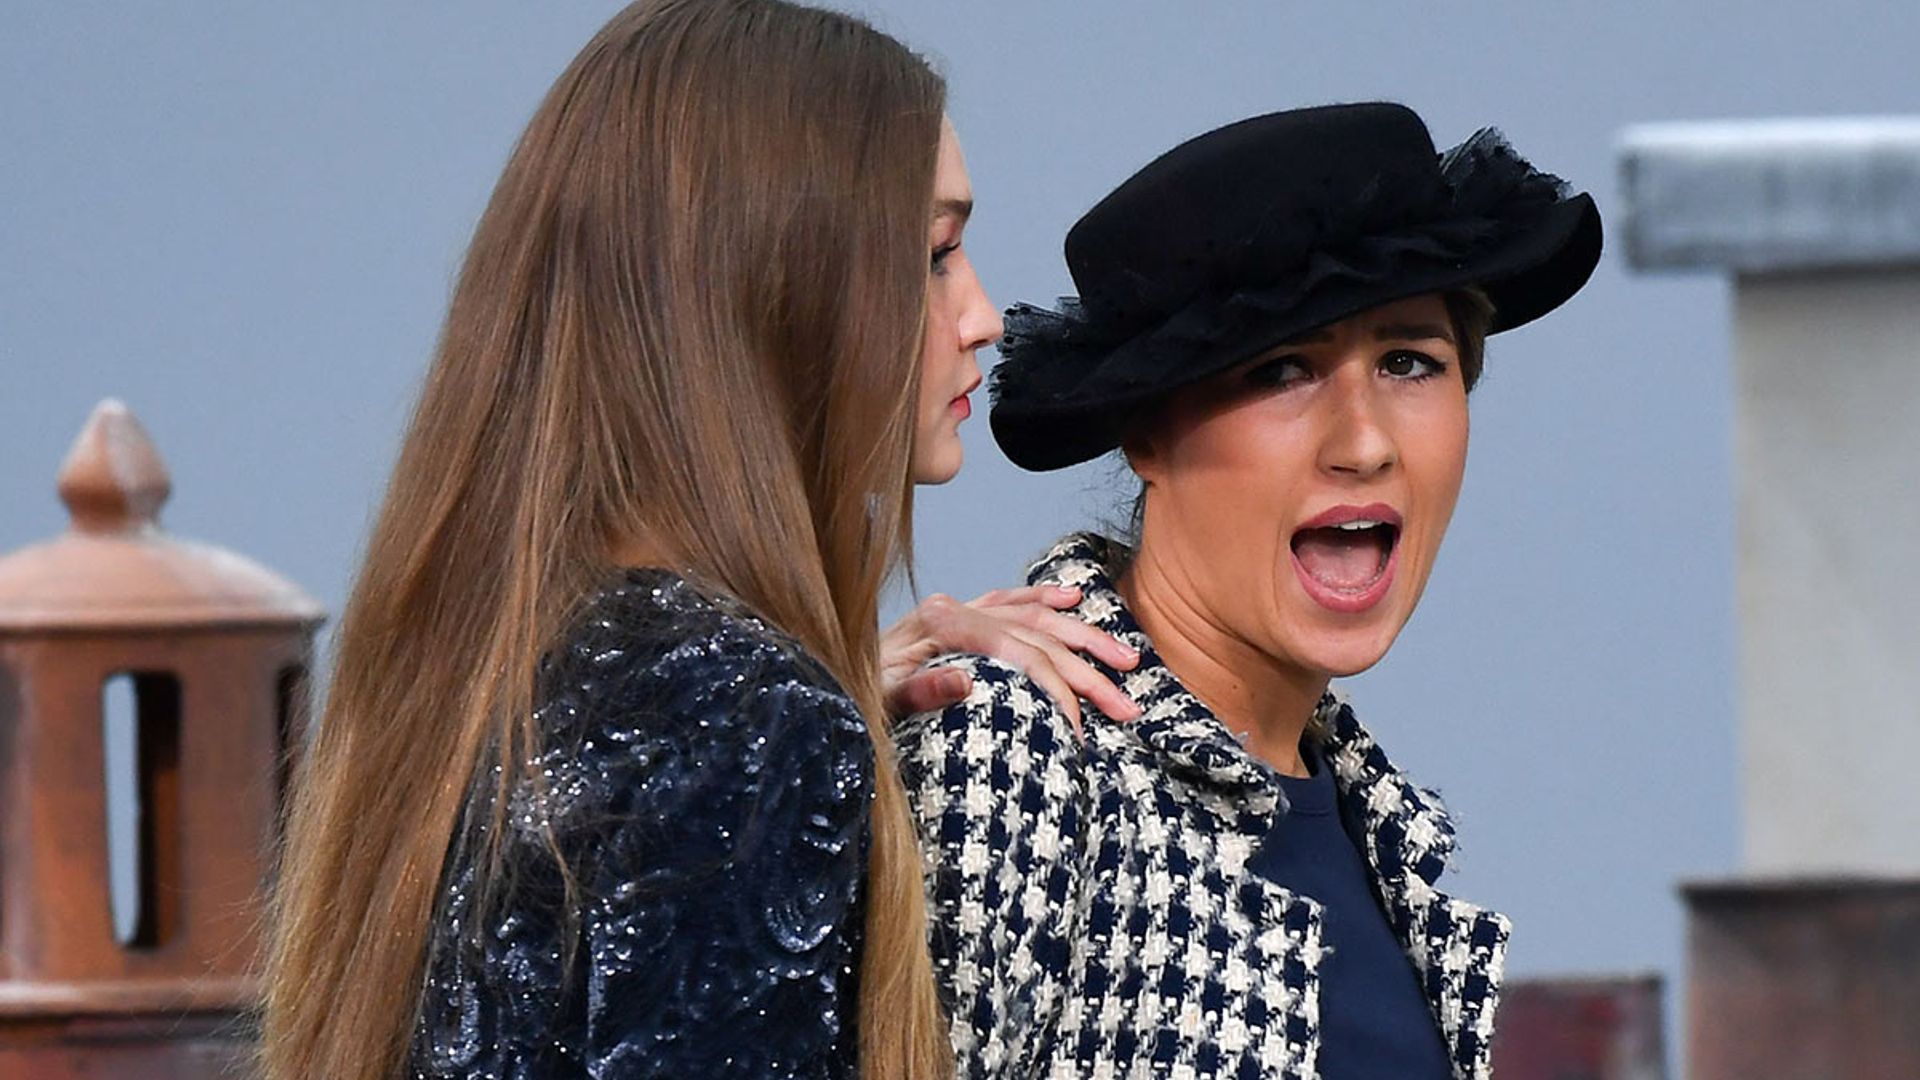 The shocking moment Gigi Hadid confronted a prankster who crashed the Chanel runway show in Paris